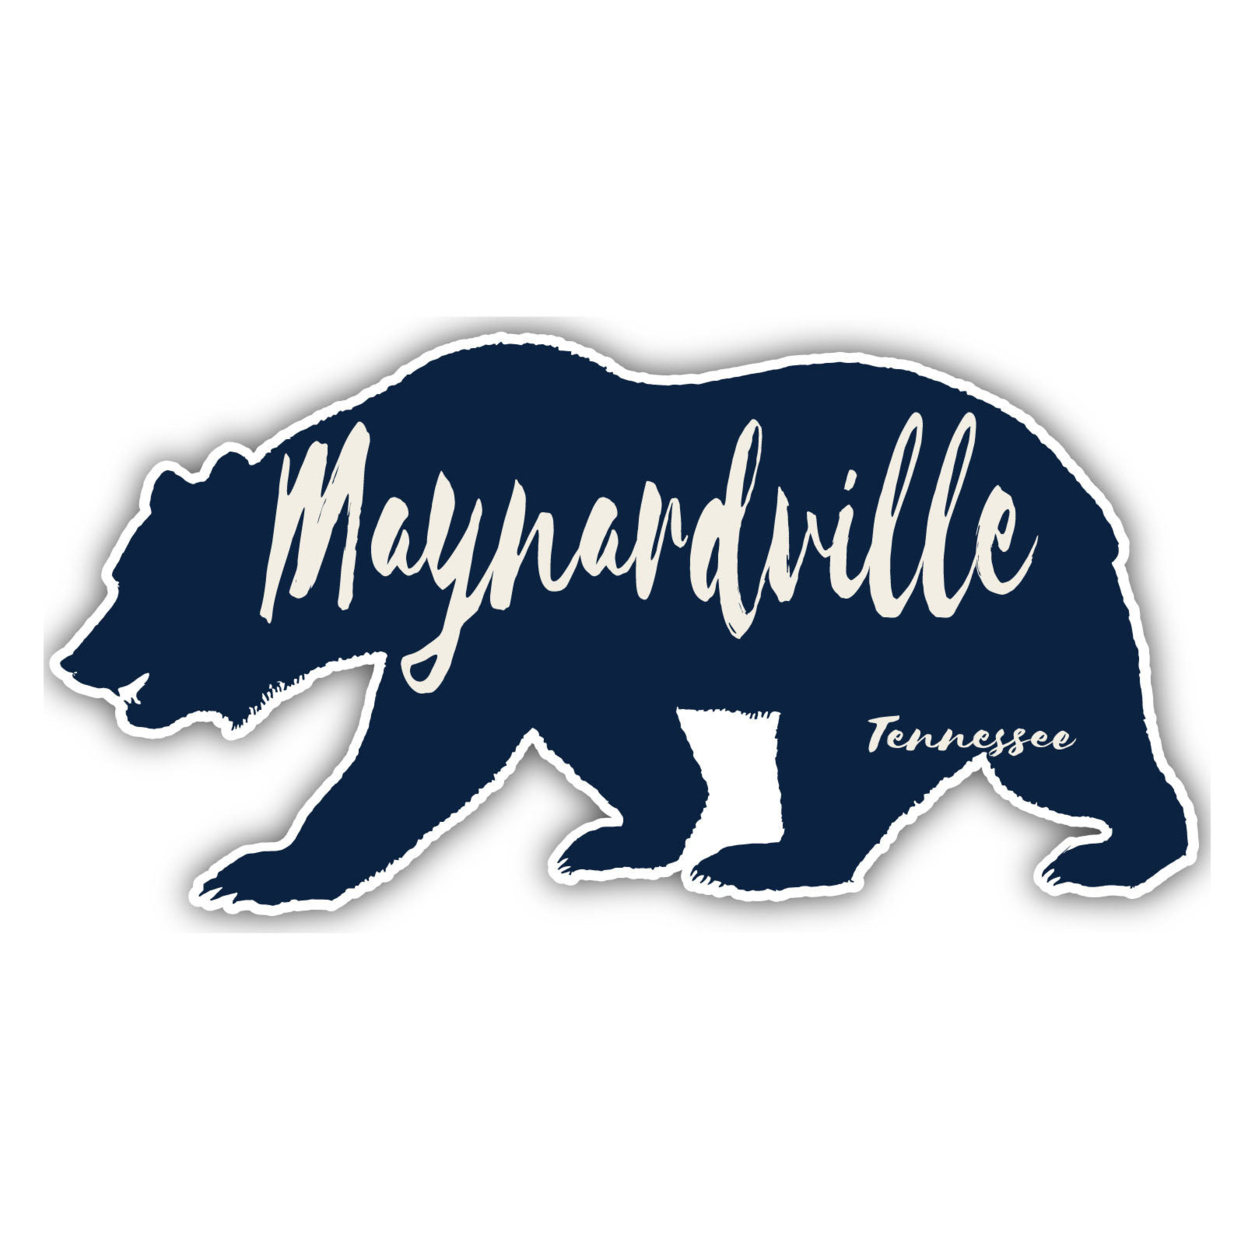 Maynardville Tennessee Souvenir Decorative Stickers (Choose Theme And Size) - 4-Inch, Bear